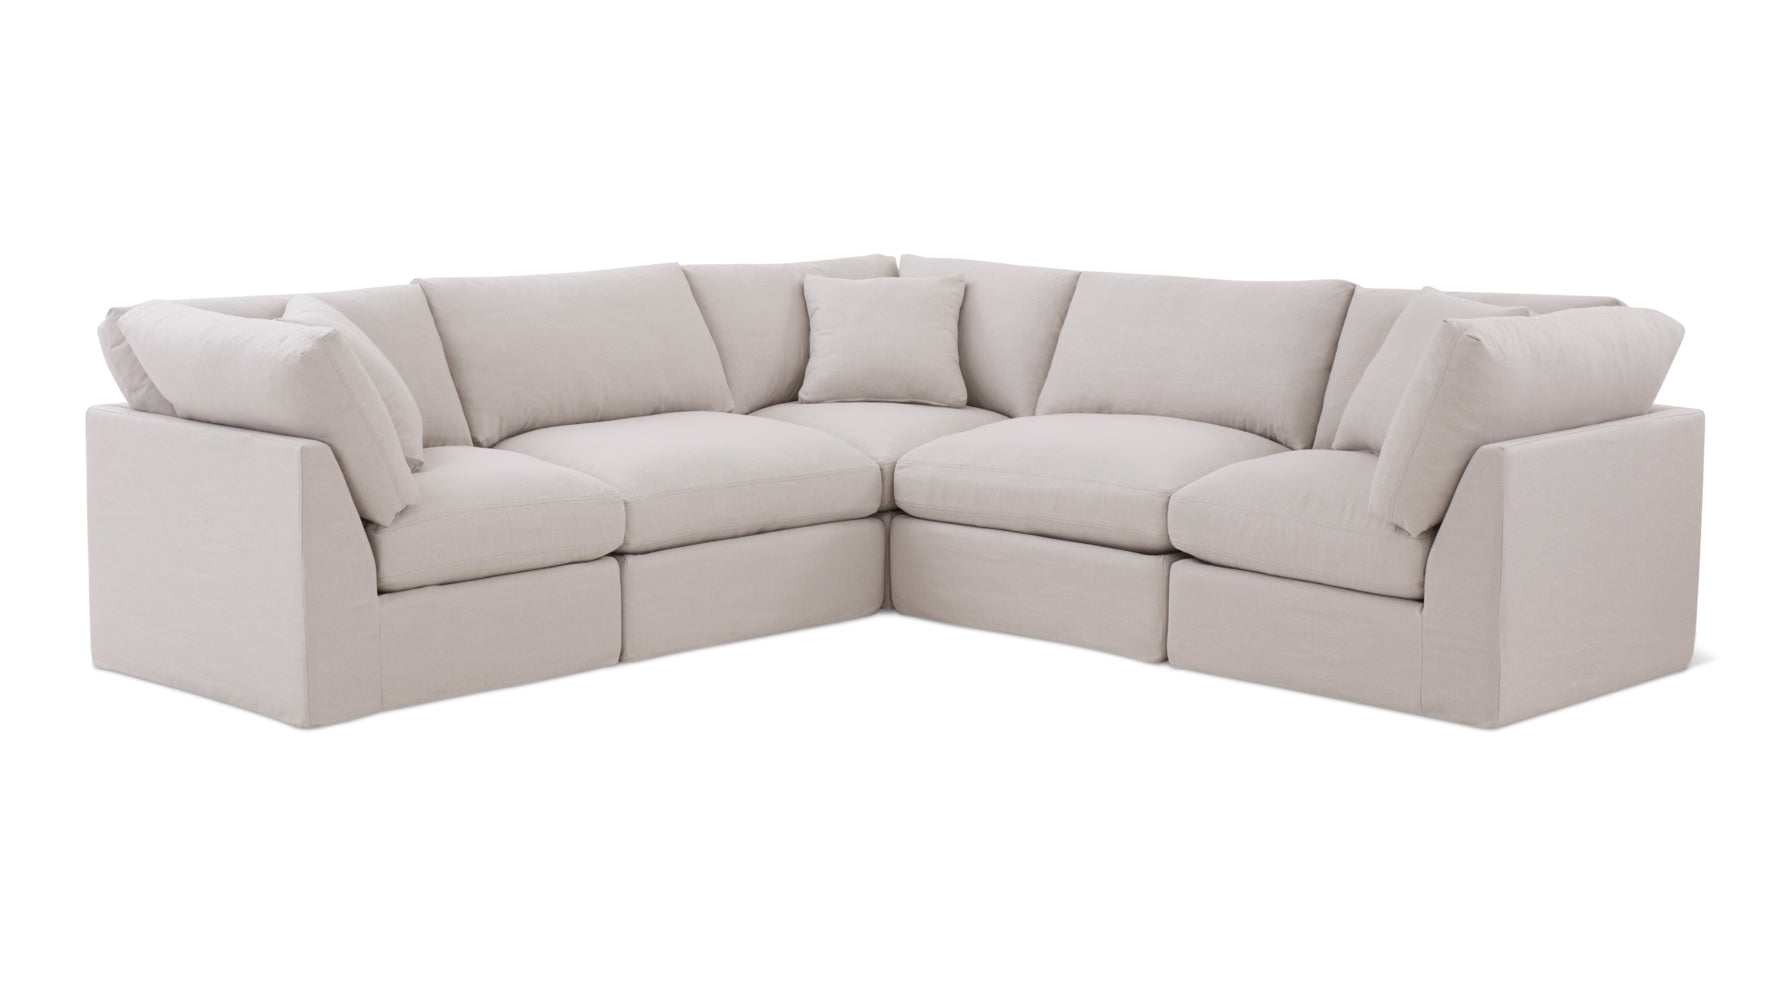 Get Together™ 5-Piece Modular Sectional Closed, Standard, Clay - Image 4